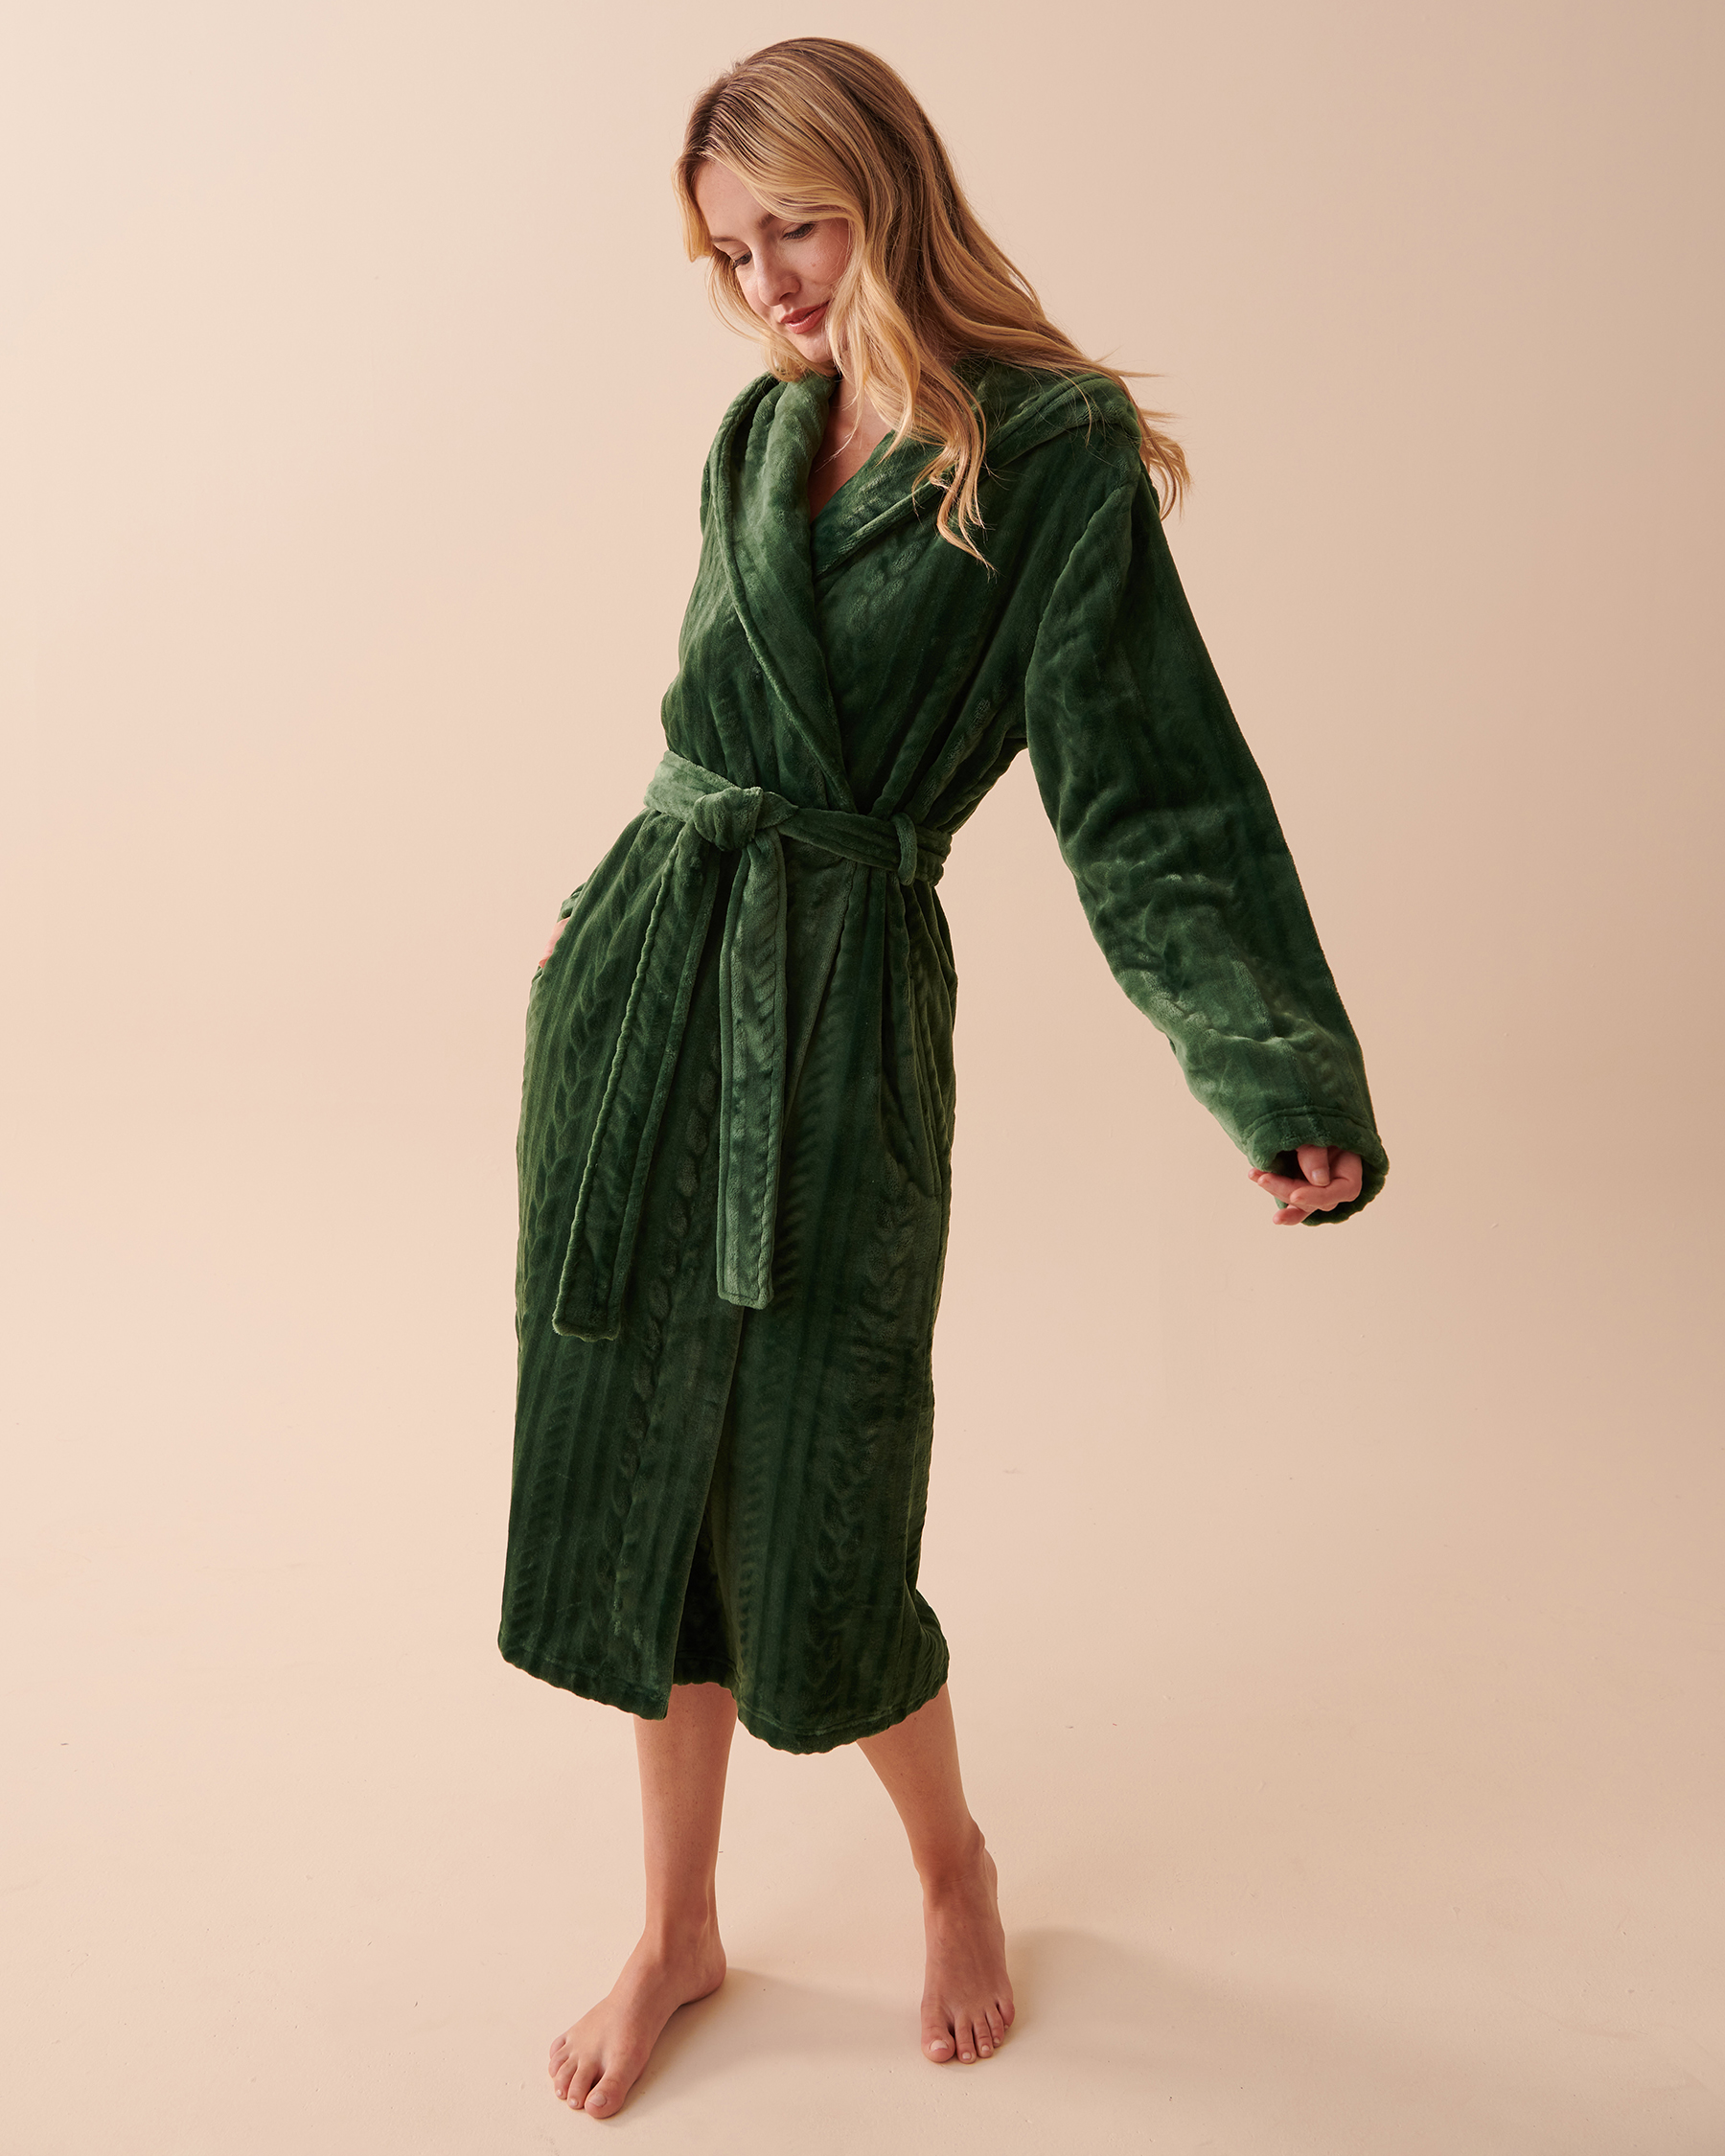 LA VIE EN ROSE Recycled Fibers Soft Cable Knit Hooded Robe Pine Green 40600146 - View1